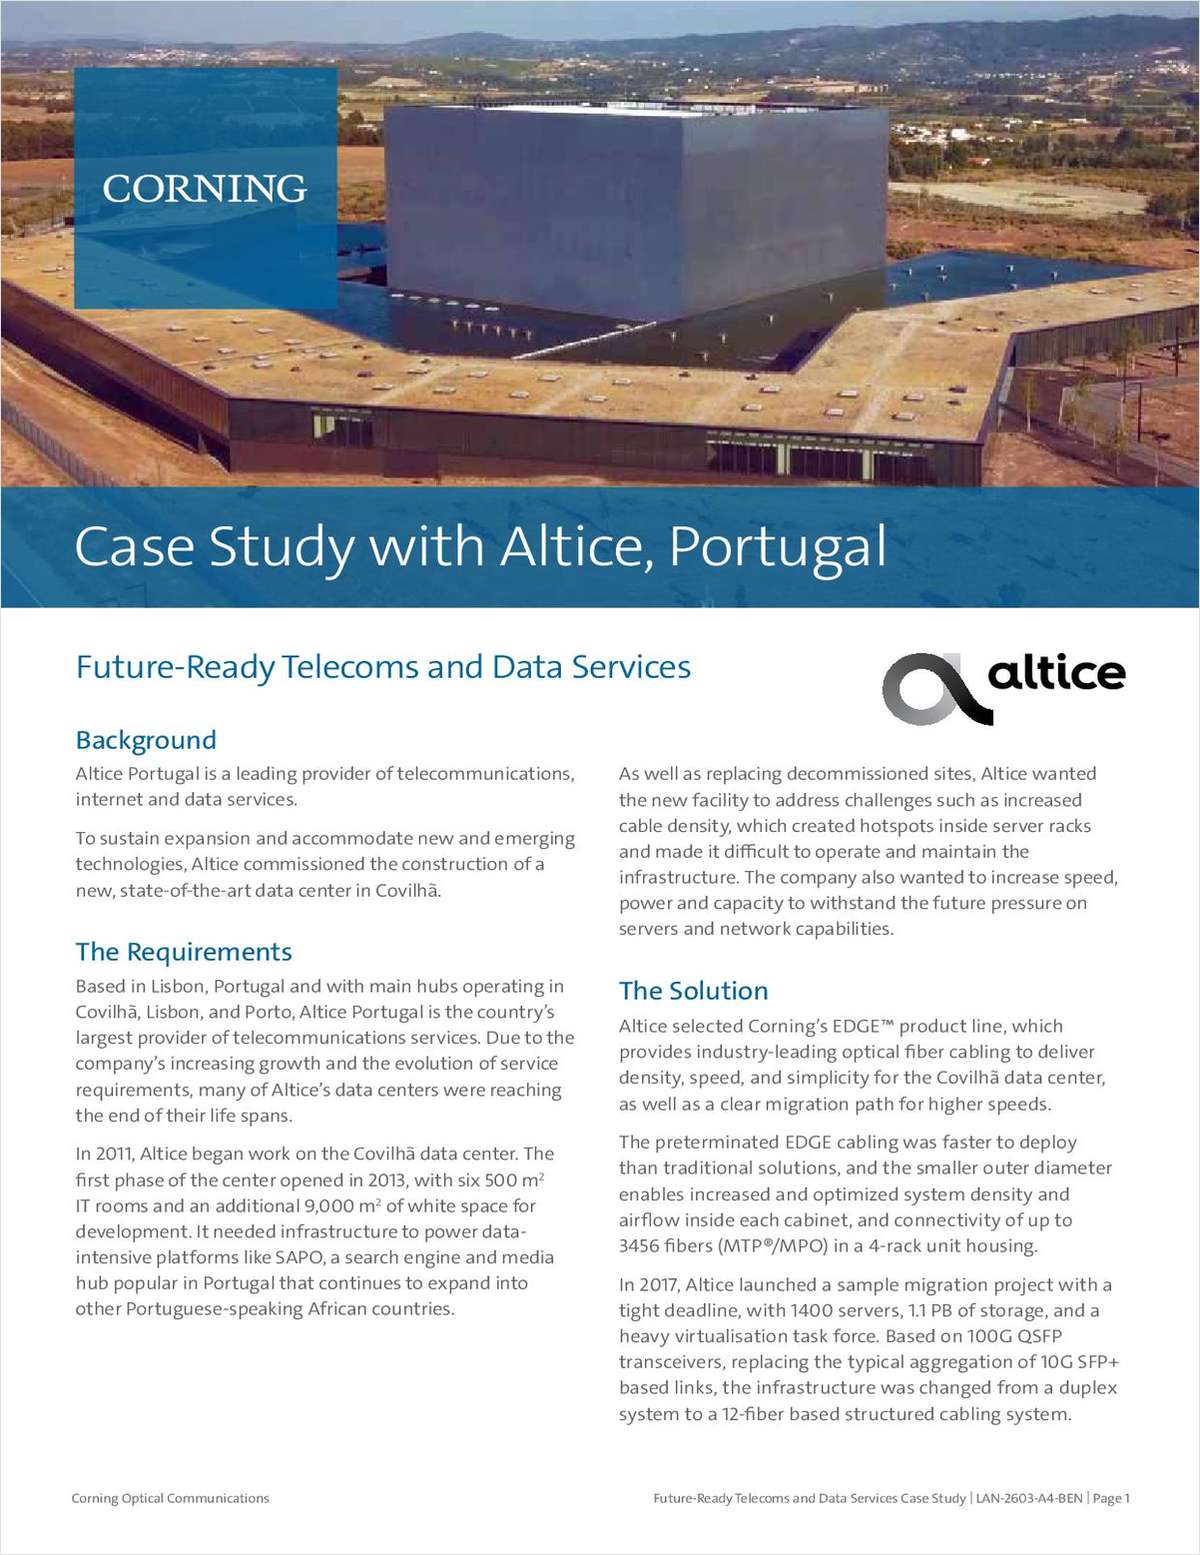 Case Study with Altice, Portugal